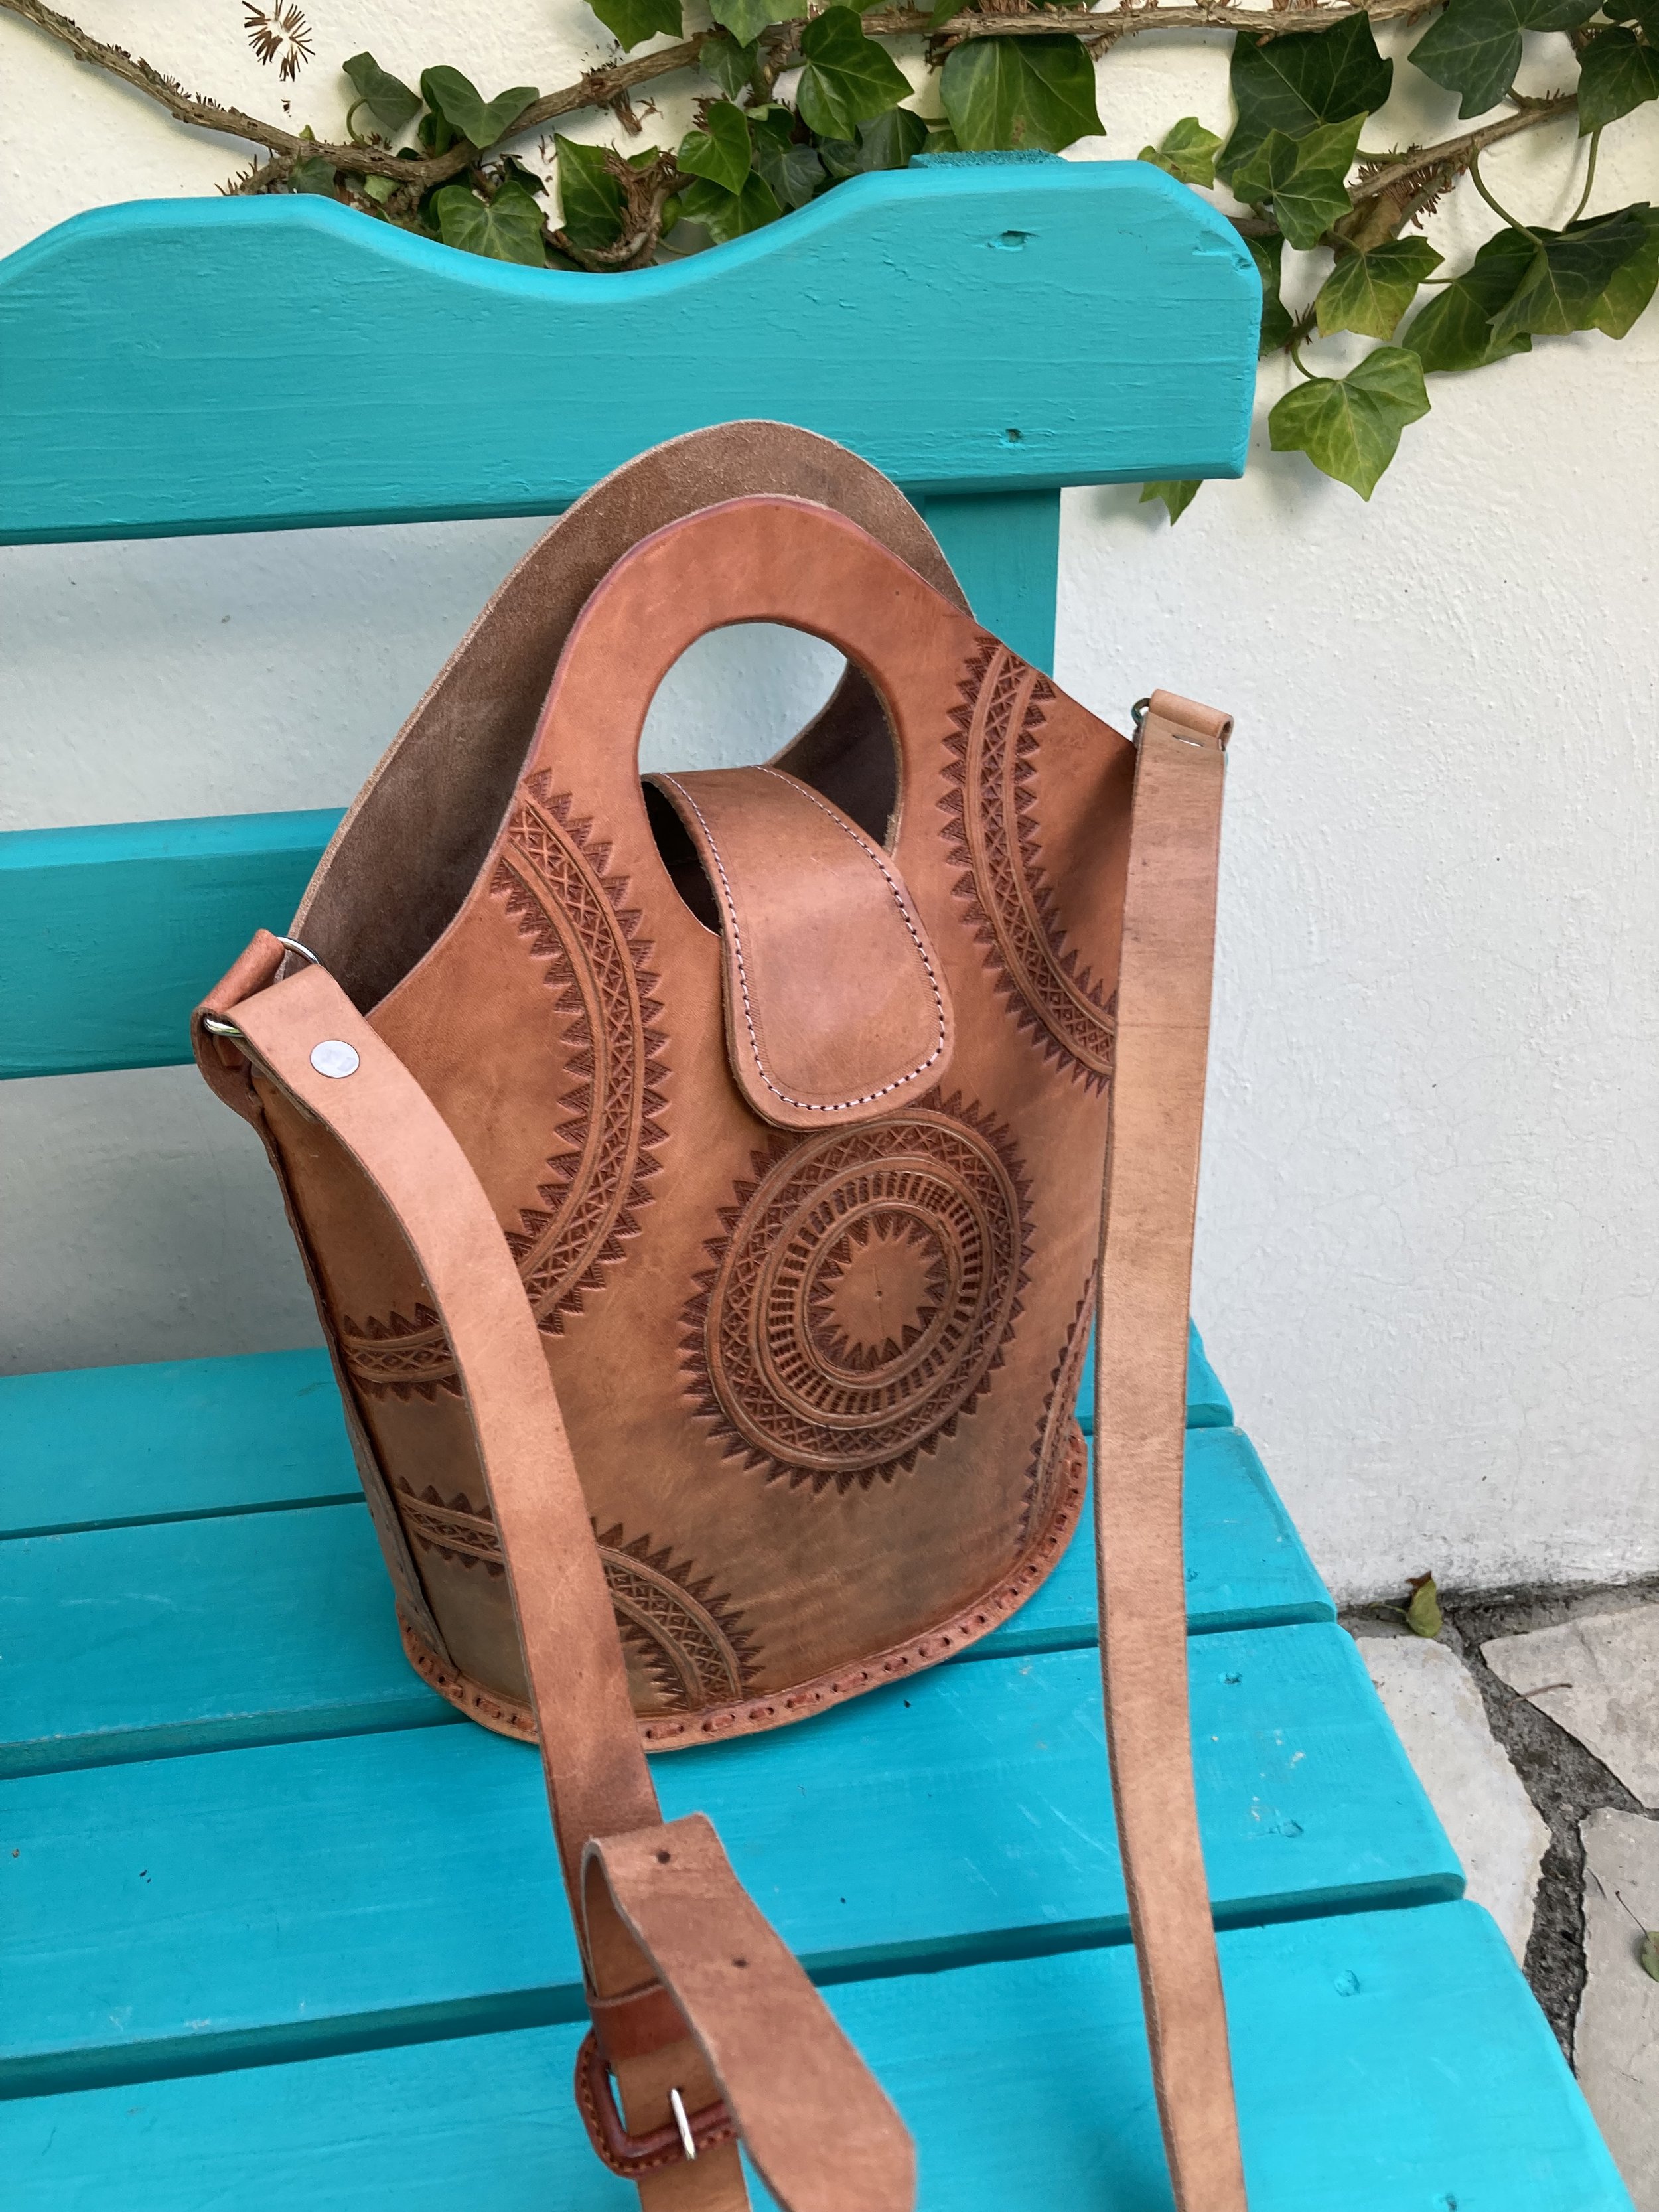 Leather Bags, Handmade Leather Bag